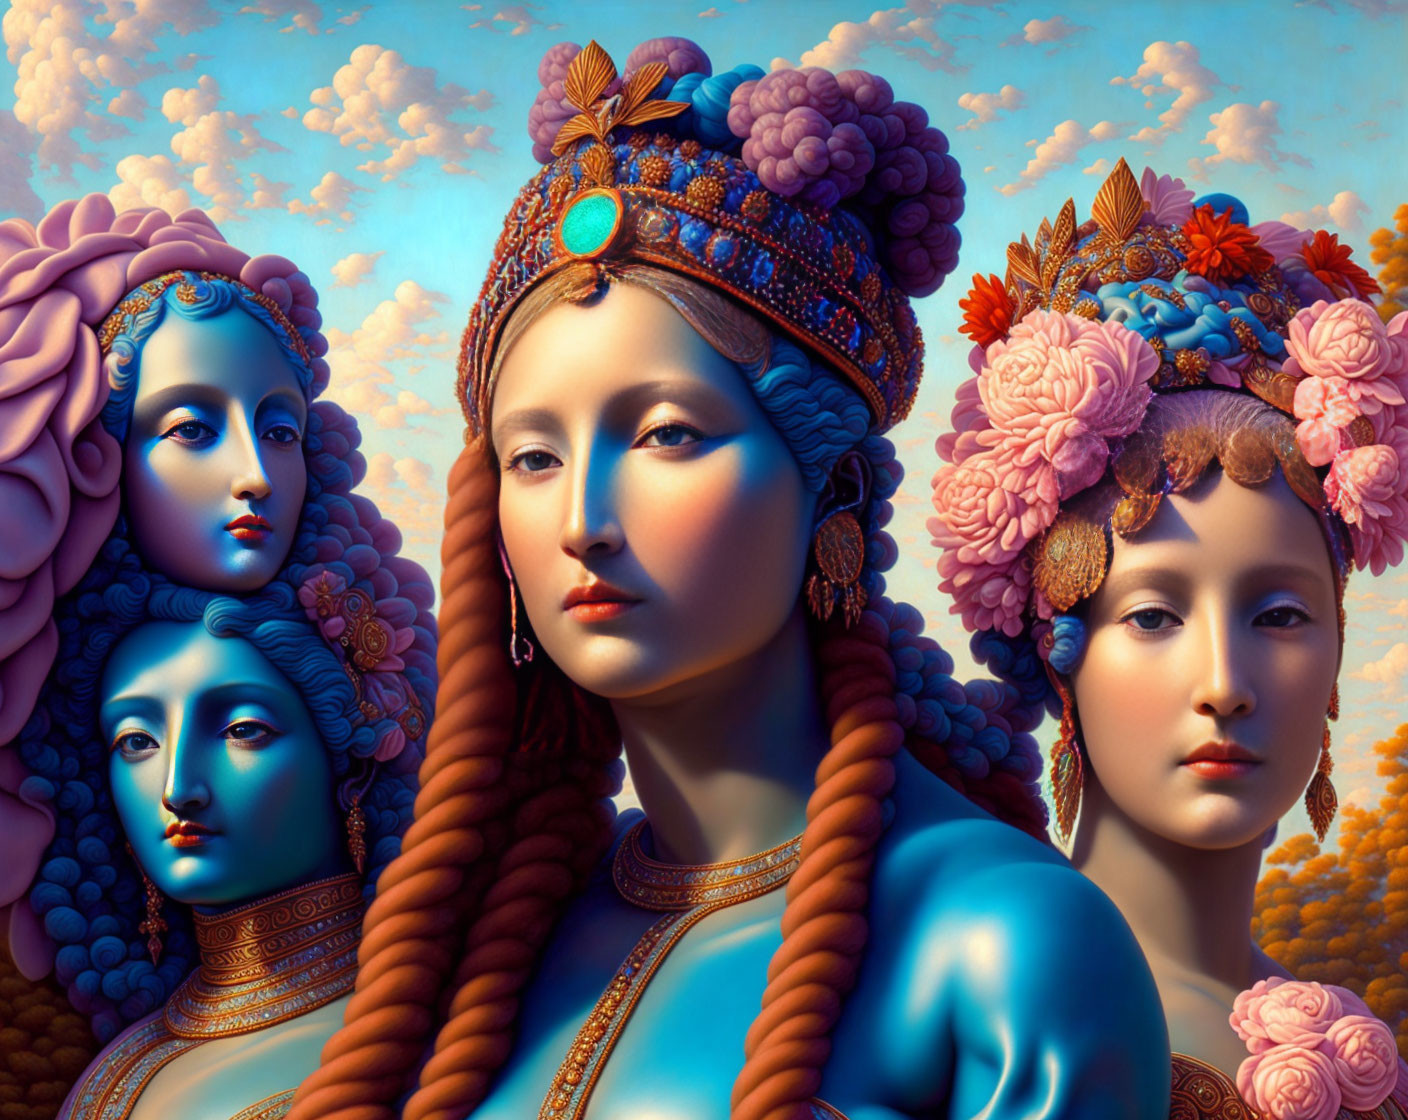 Stylized colorful female figures with elaborate headwear and decorative flowers on sky-blue background